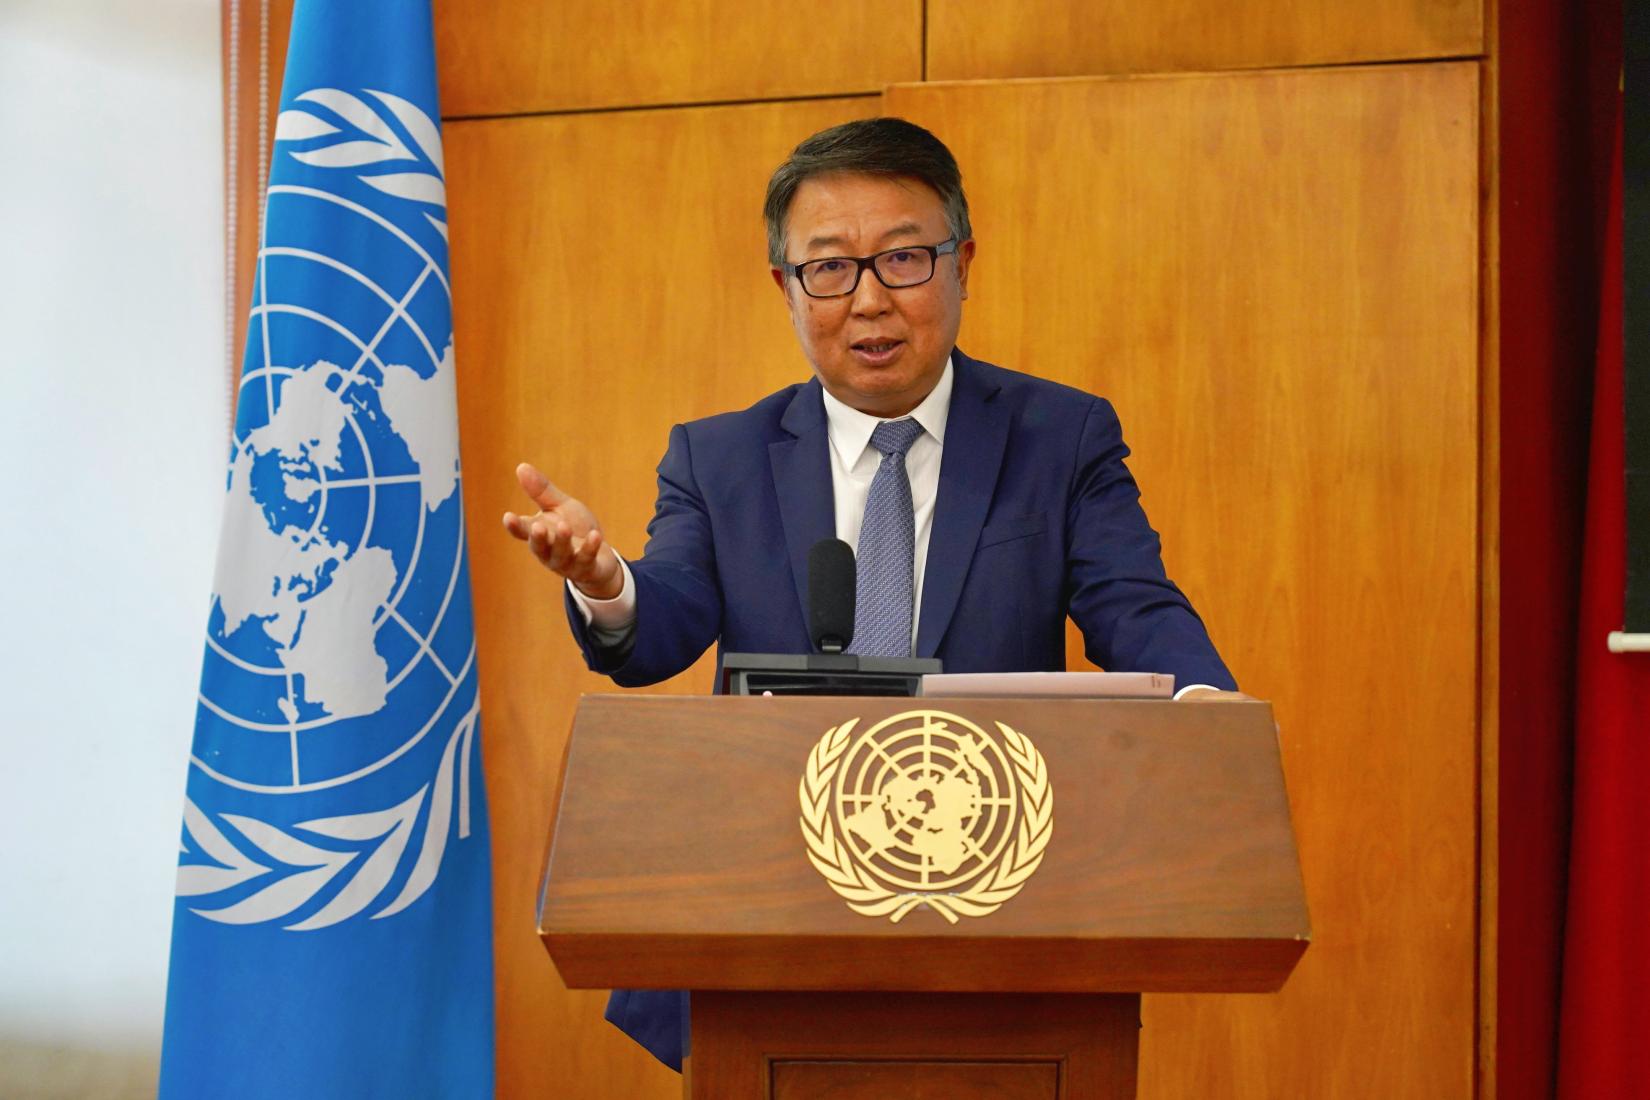 Wu Peng, the Director-General of the Department of African Affairs at the Ministry of Foreign Affairs for the People’s Republic of China